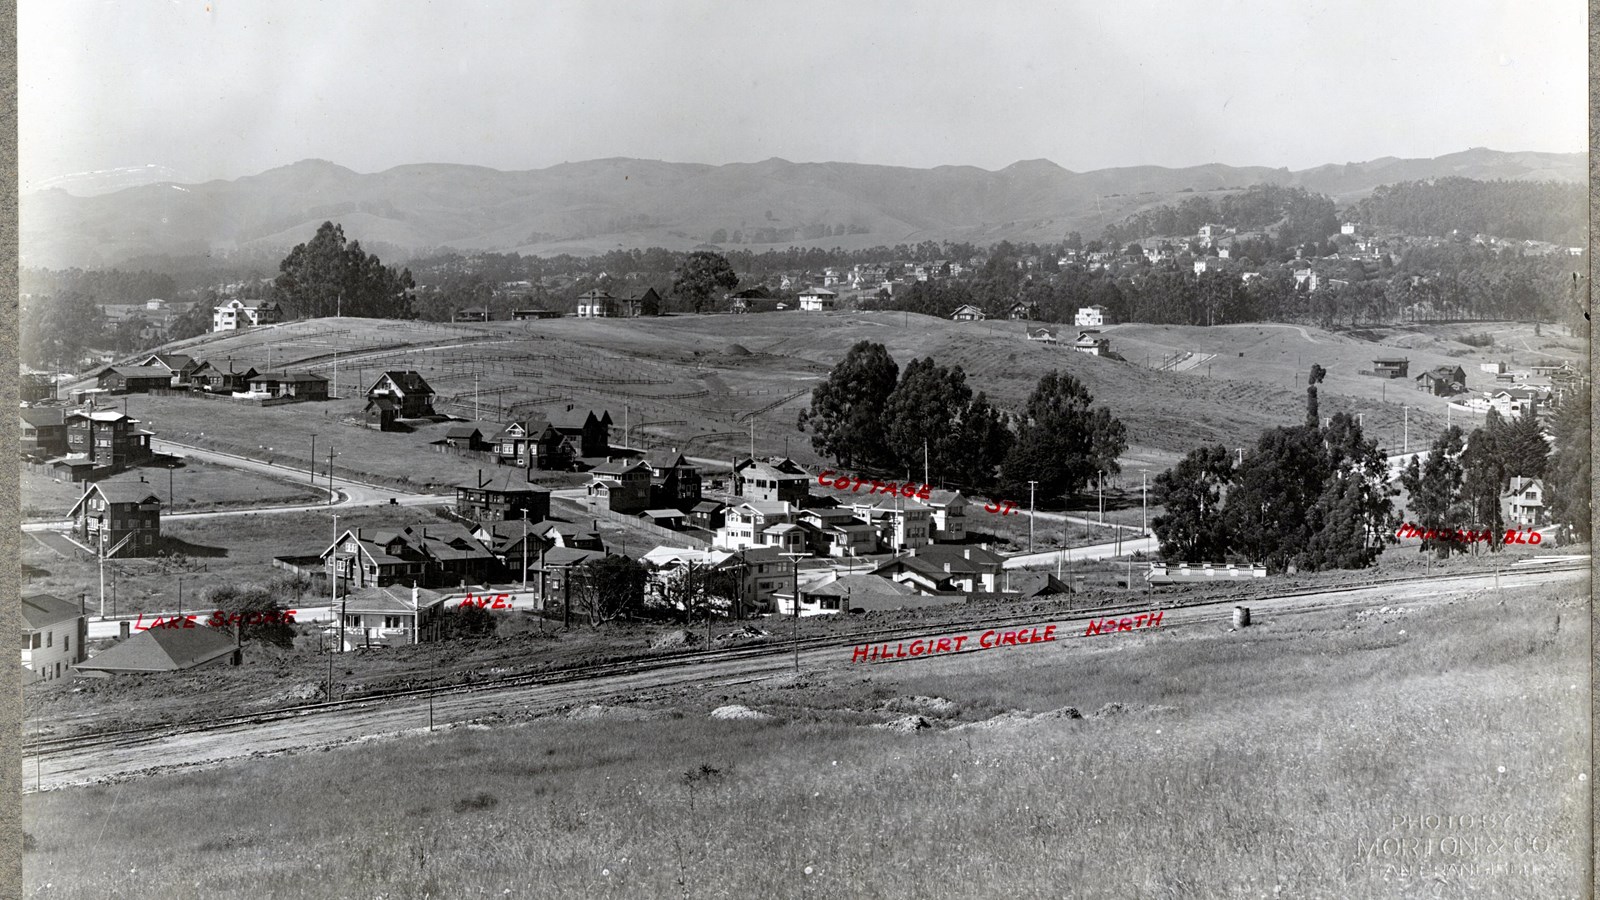 Black and white of grassy area with many homes and streets intersecting, mountains in distance